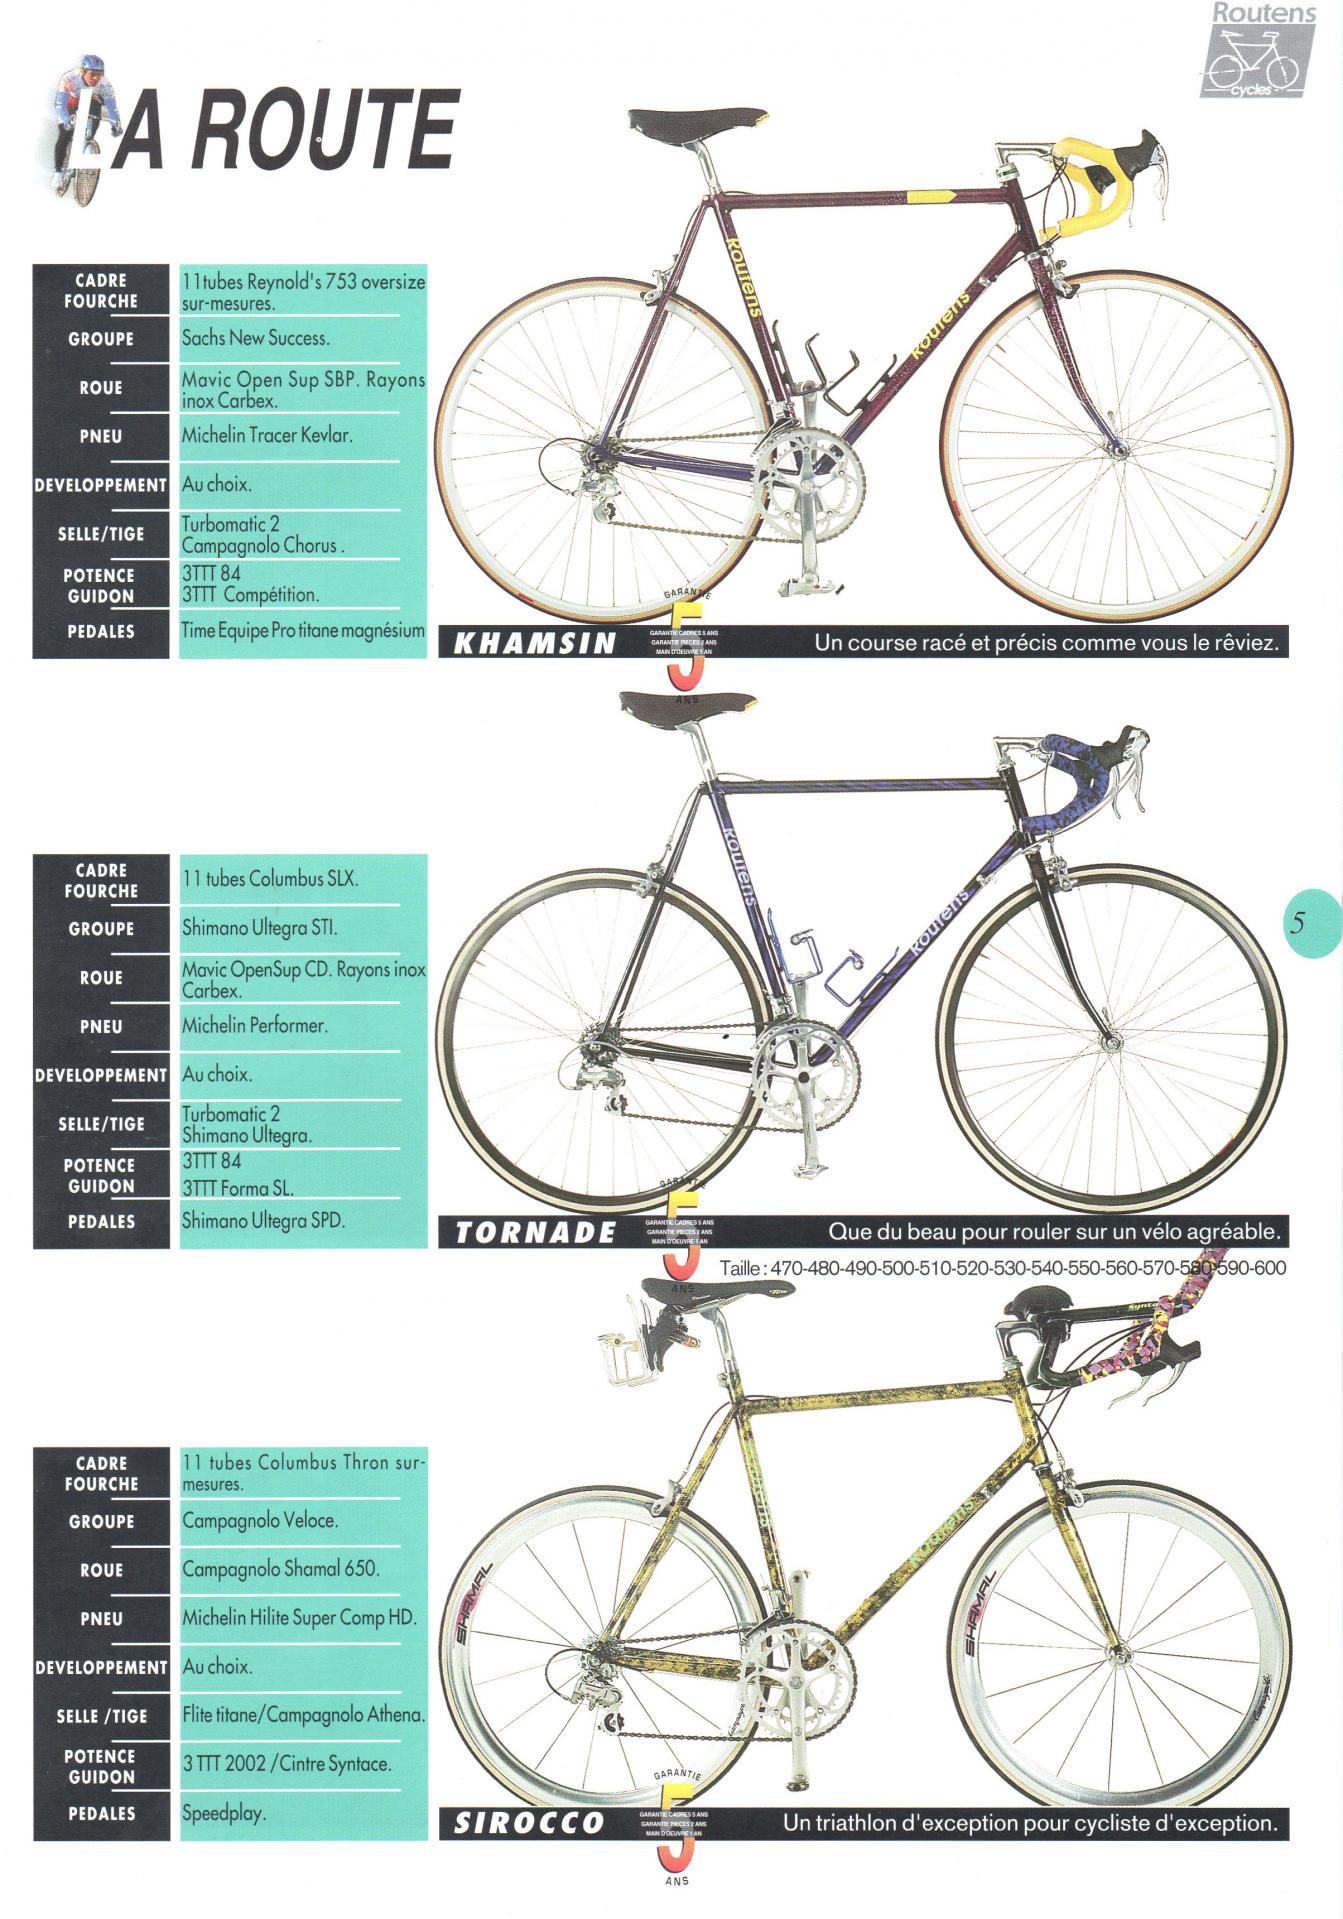 Routens cycles catalogue 1994 5